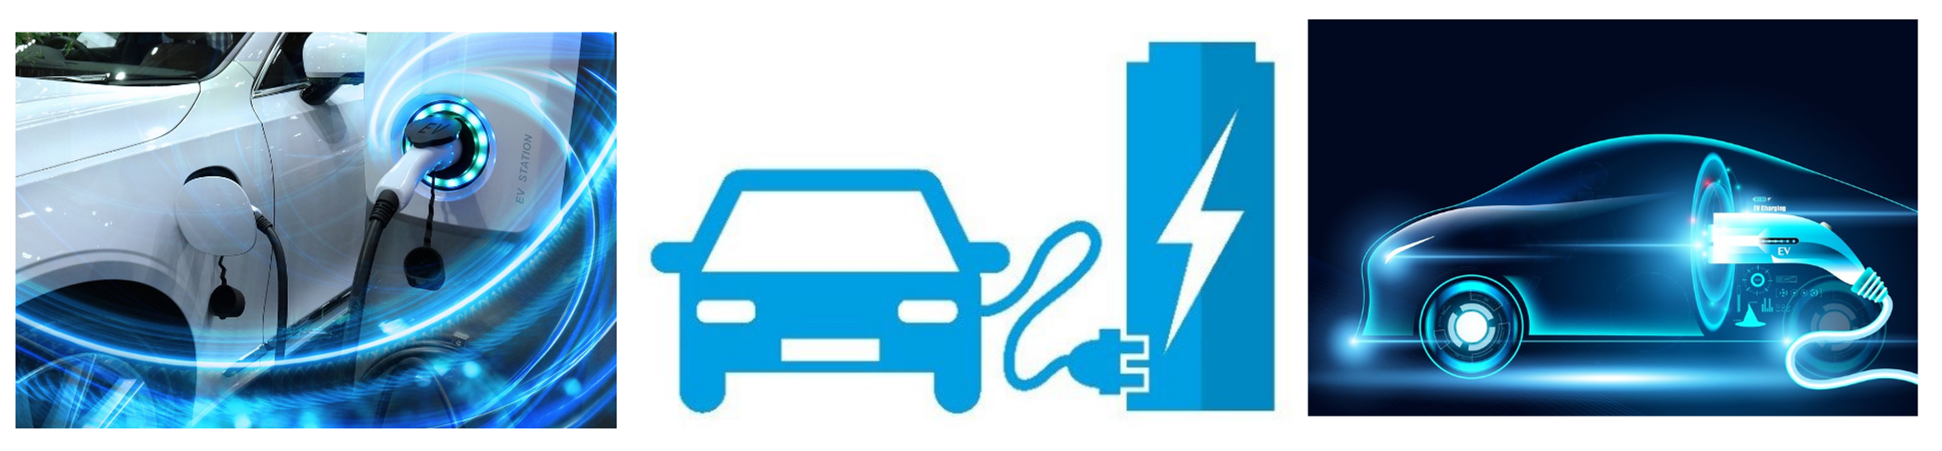 Electric Vehicle Banner Image